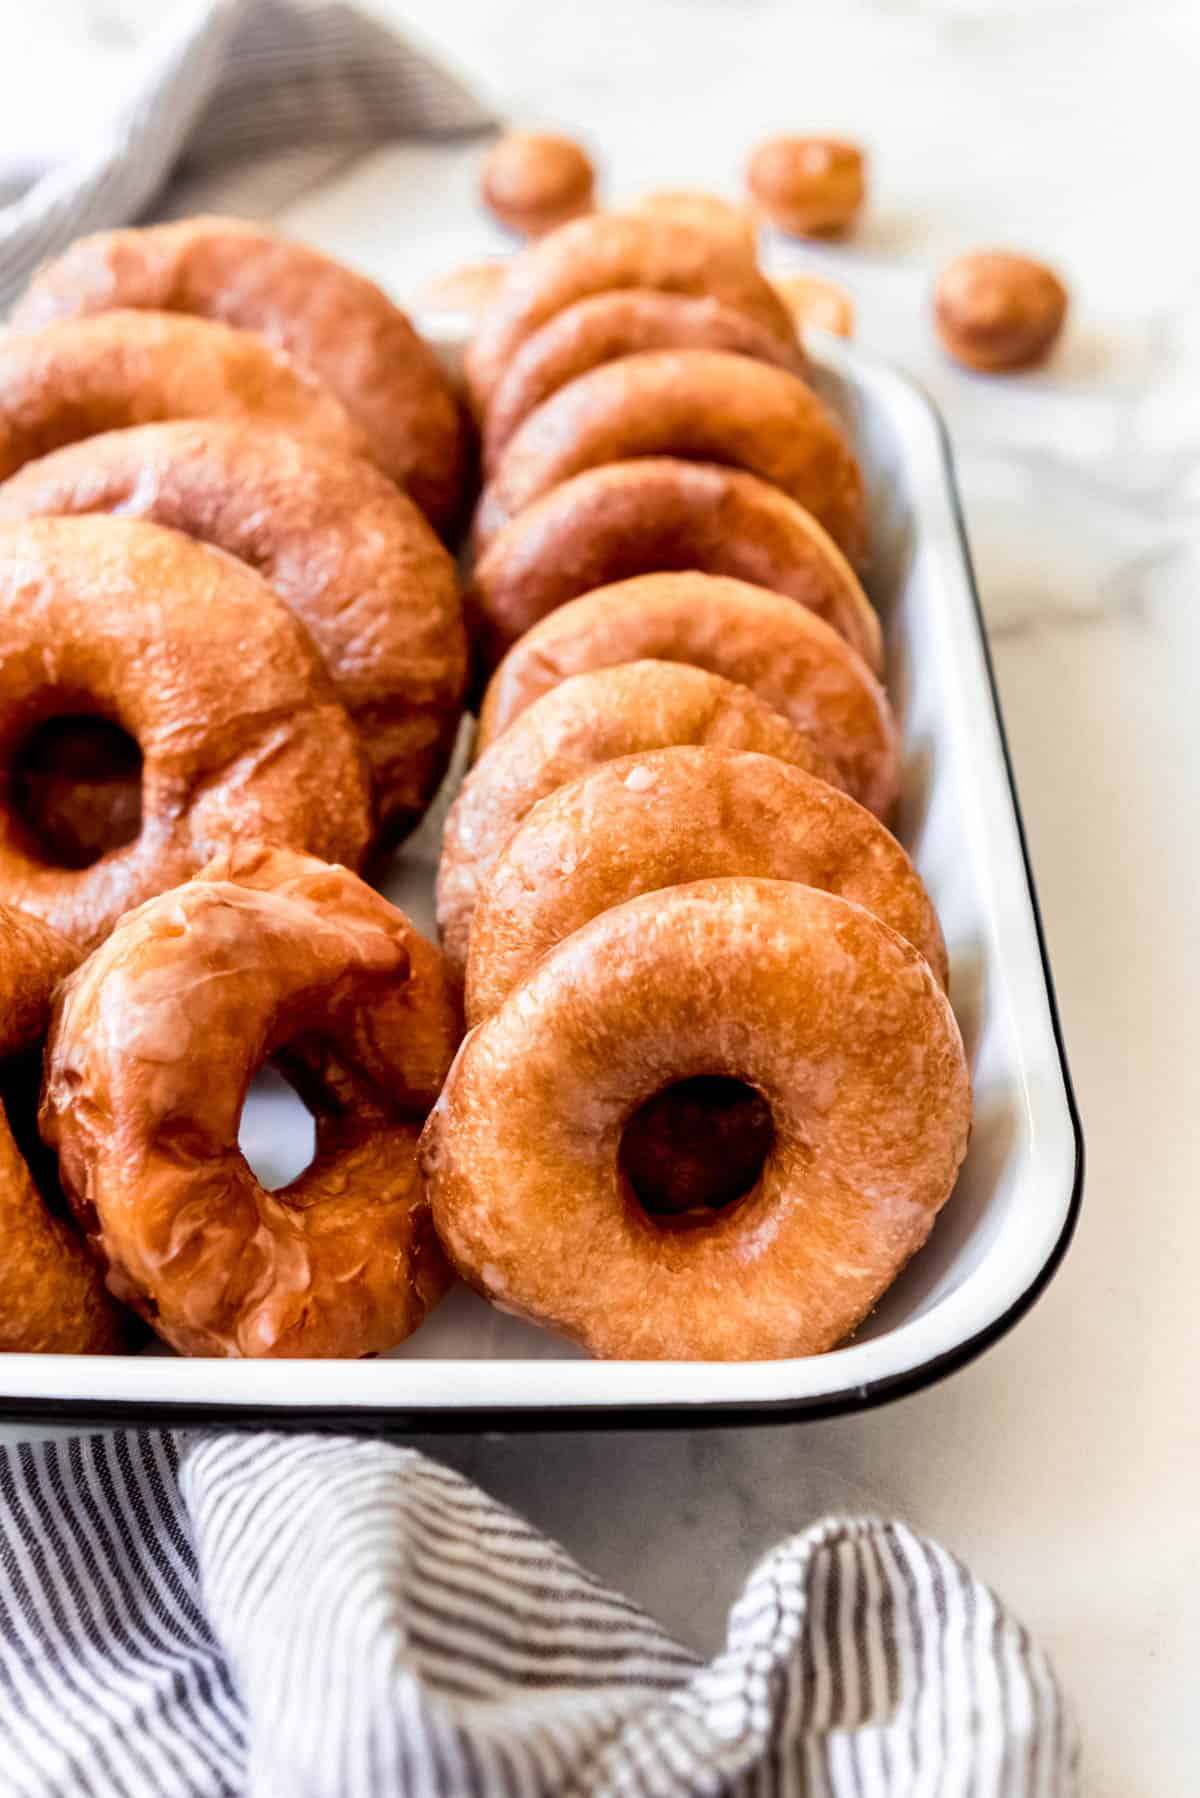 Yeast-raised donuts in a row in a baking dish.